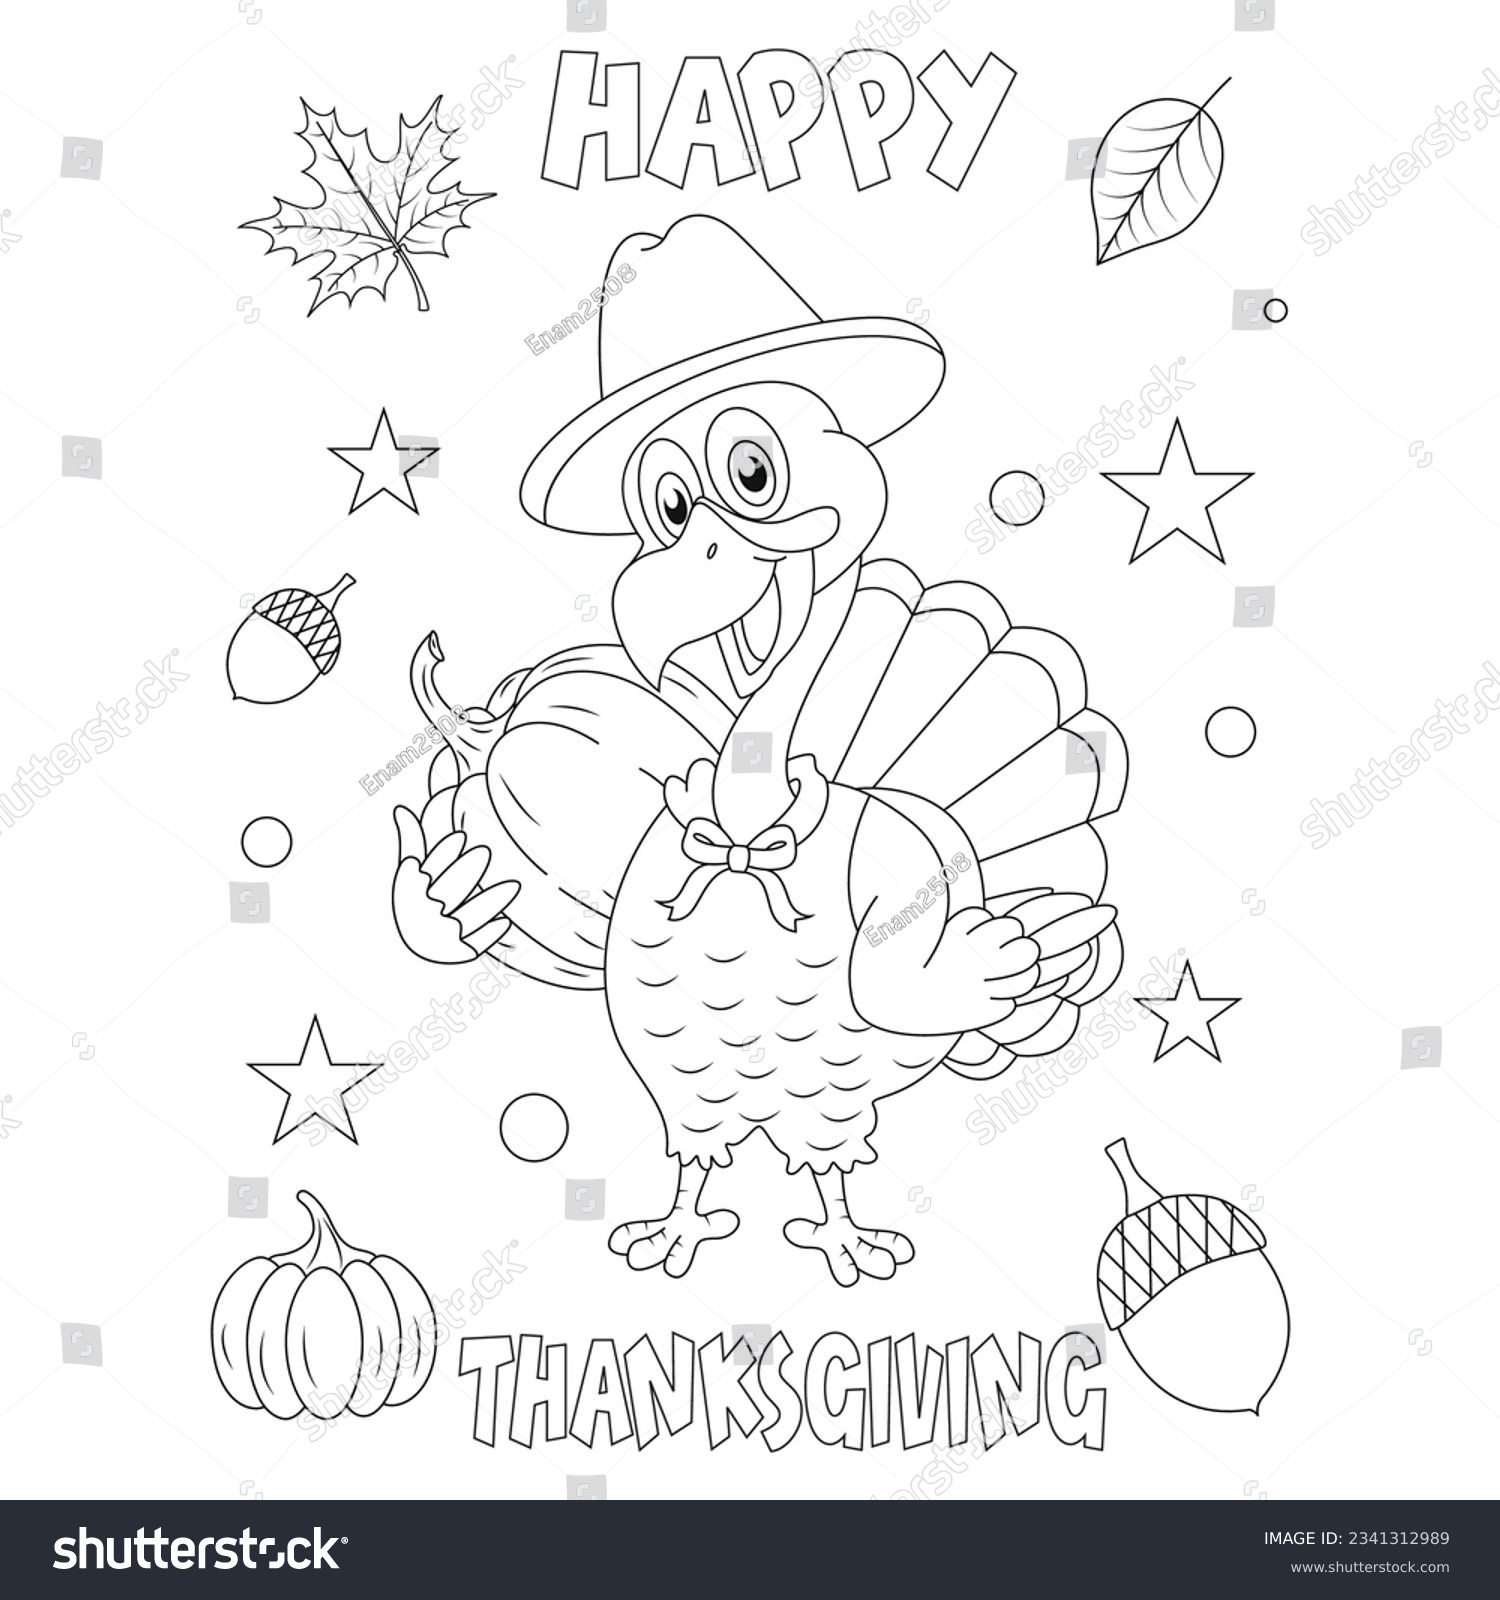 Turkey coloring page images stock photos d objects vectors